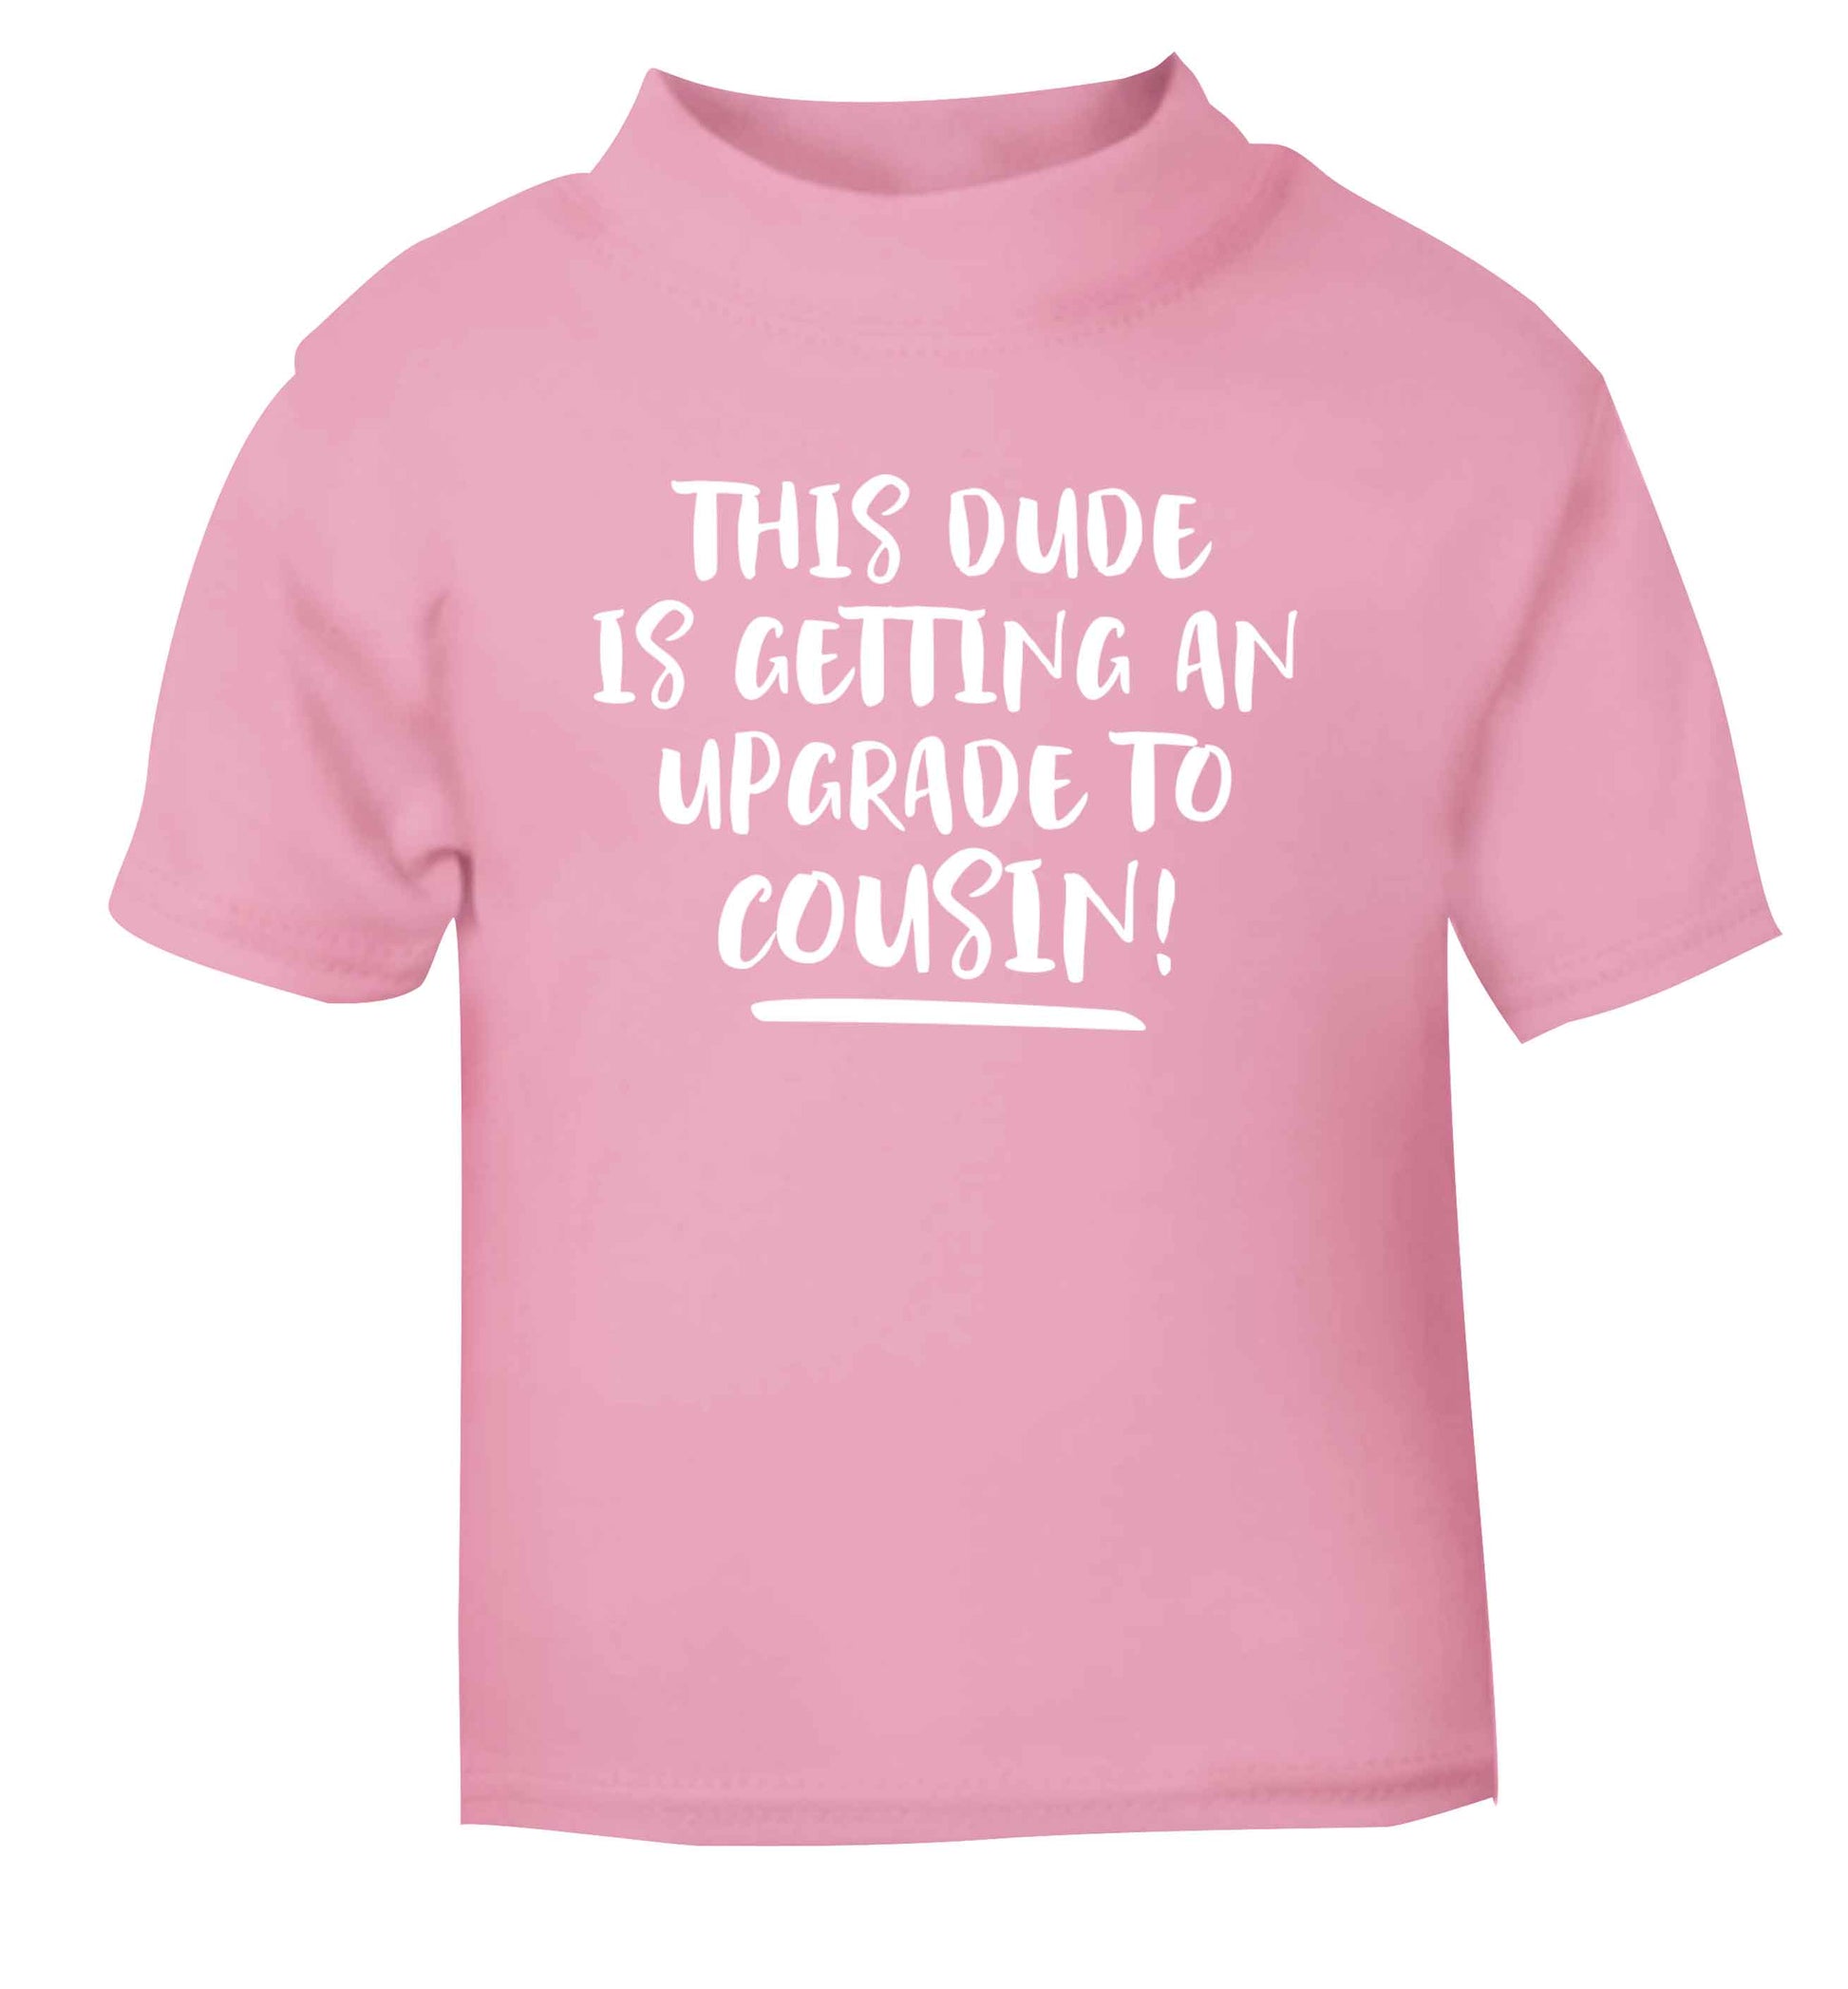 This dude is getting an upgrade to cousin! light pink Baby Toddler Tshirt 2 Years